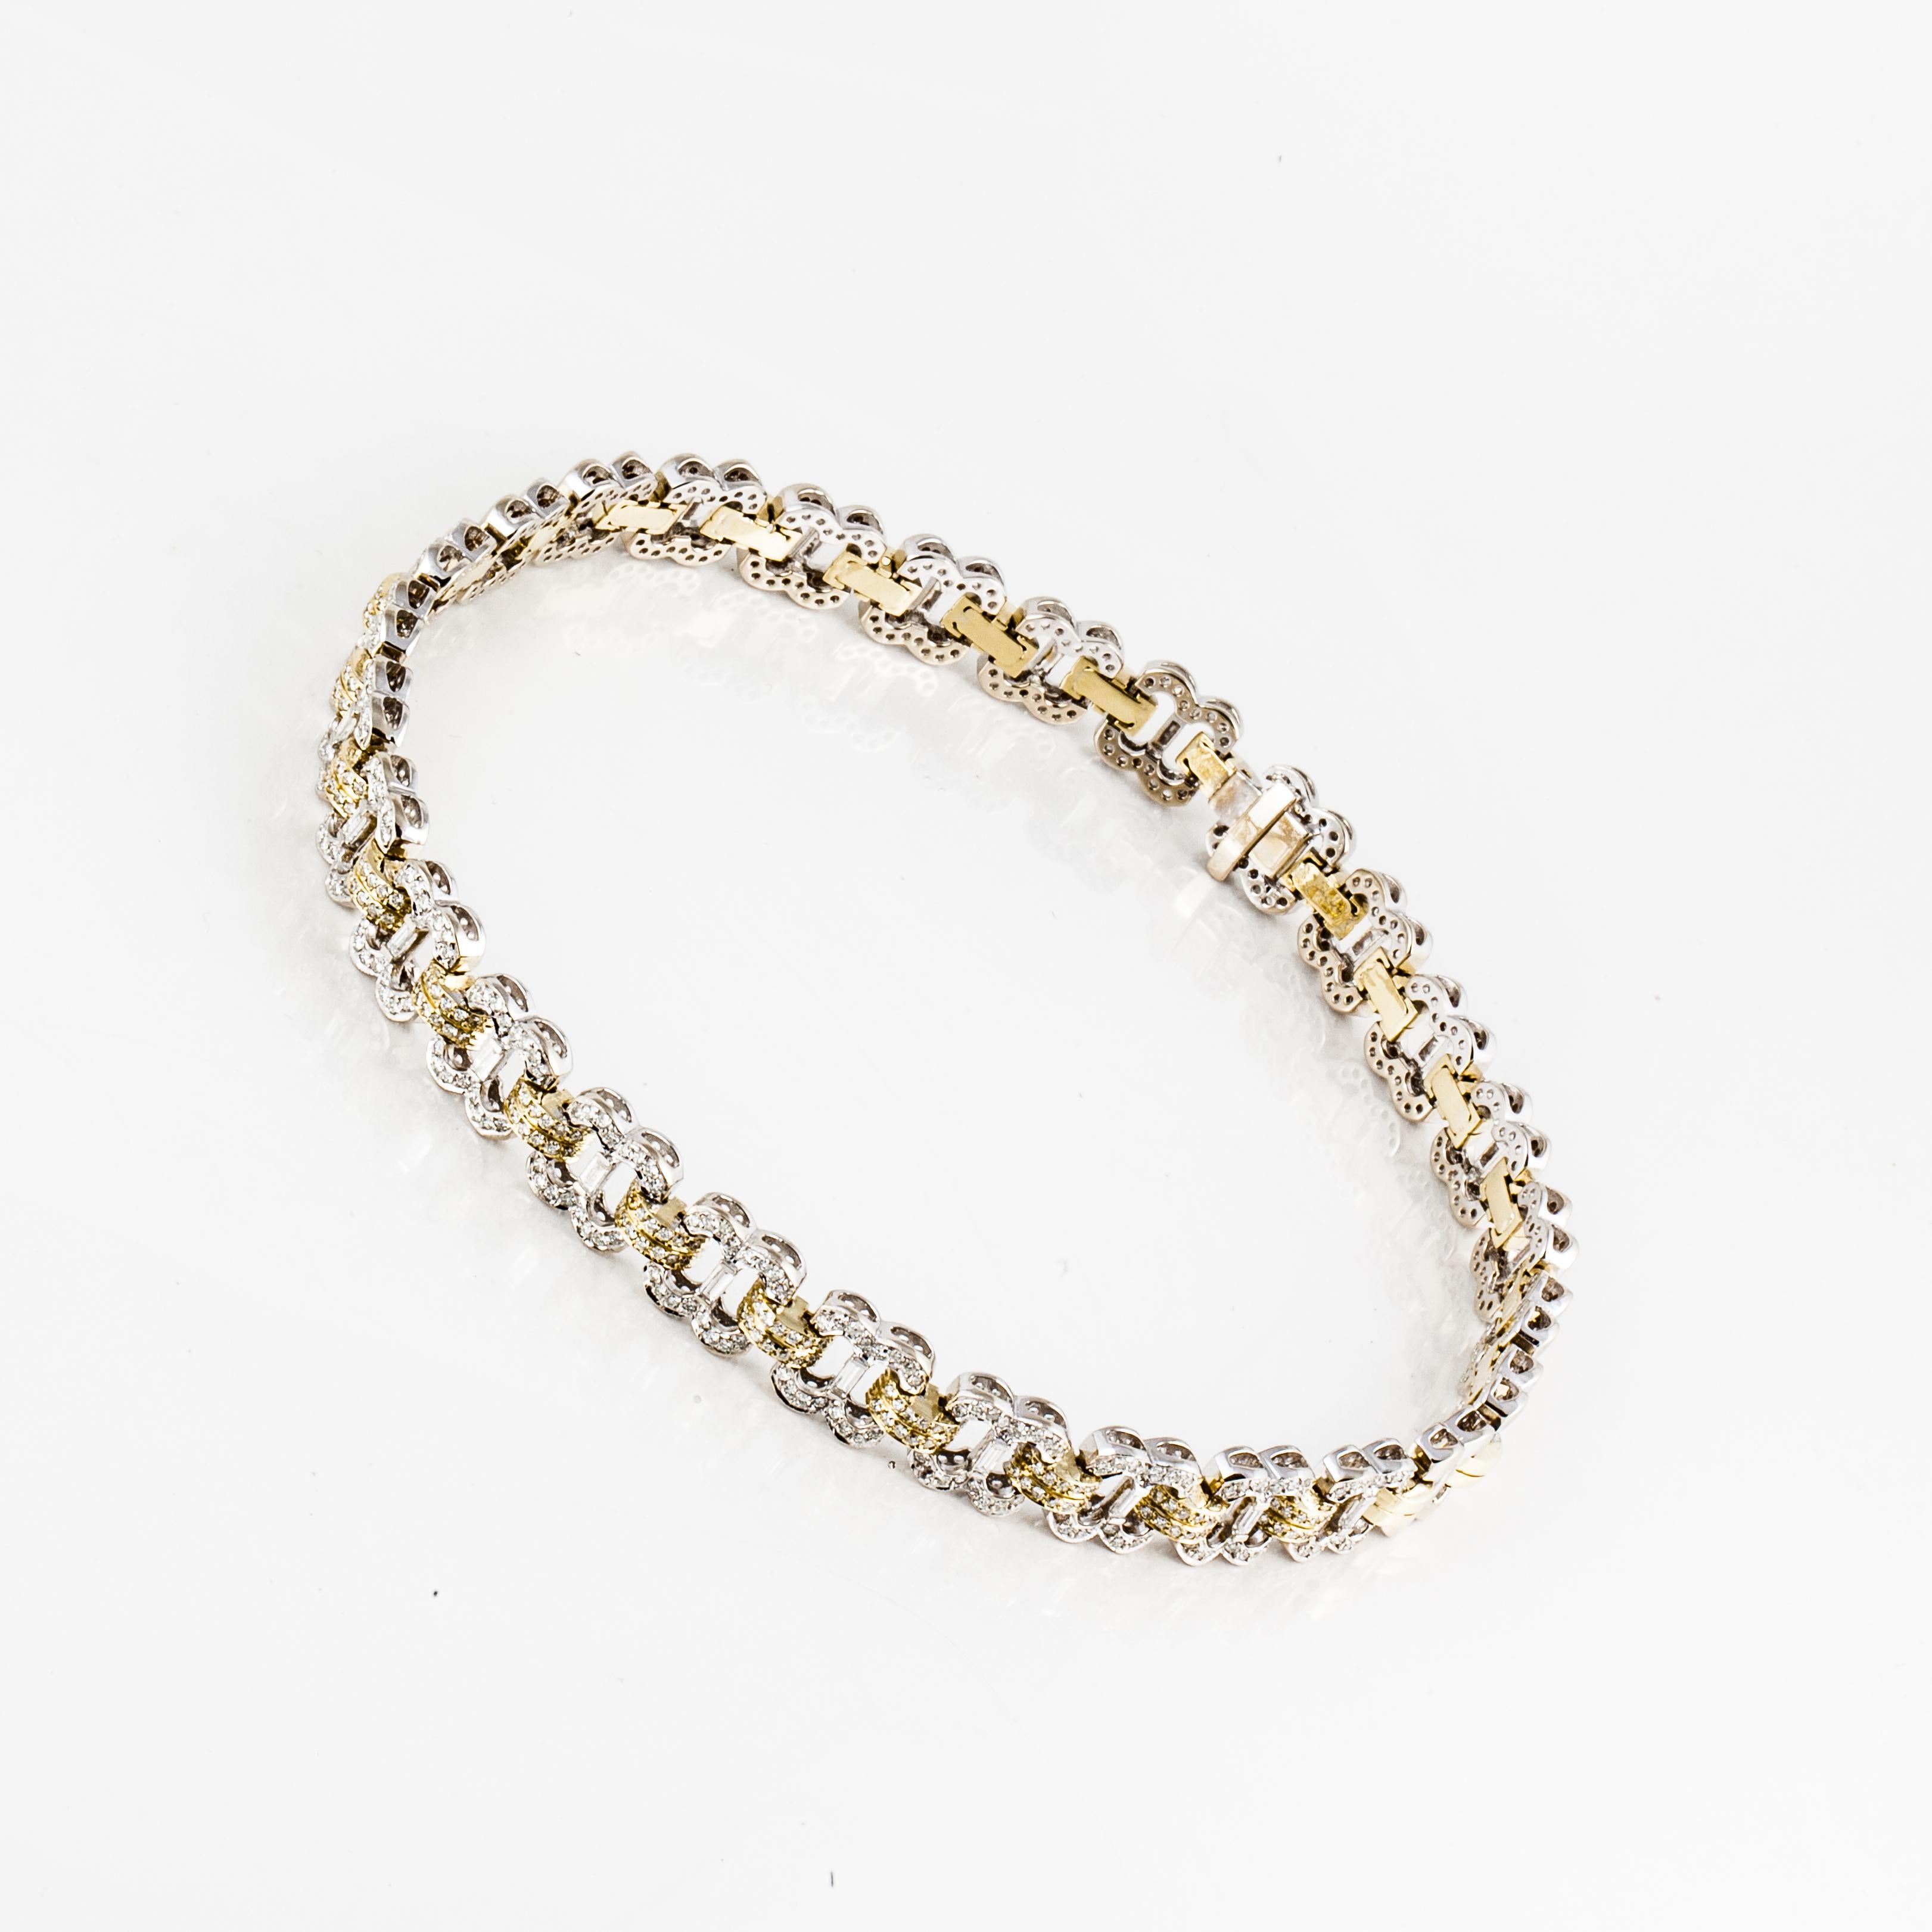 18K two tone necklace in both yellow and white gold with round and baguette diamonds.  The front links are encrusted with round diamonds and each white gold link has a baguette diamond in the center.  Total of 272 round diamonds totaling 5.50 carats